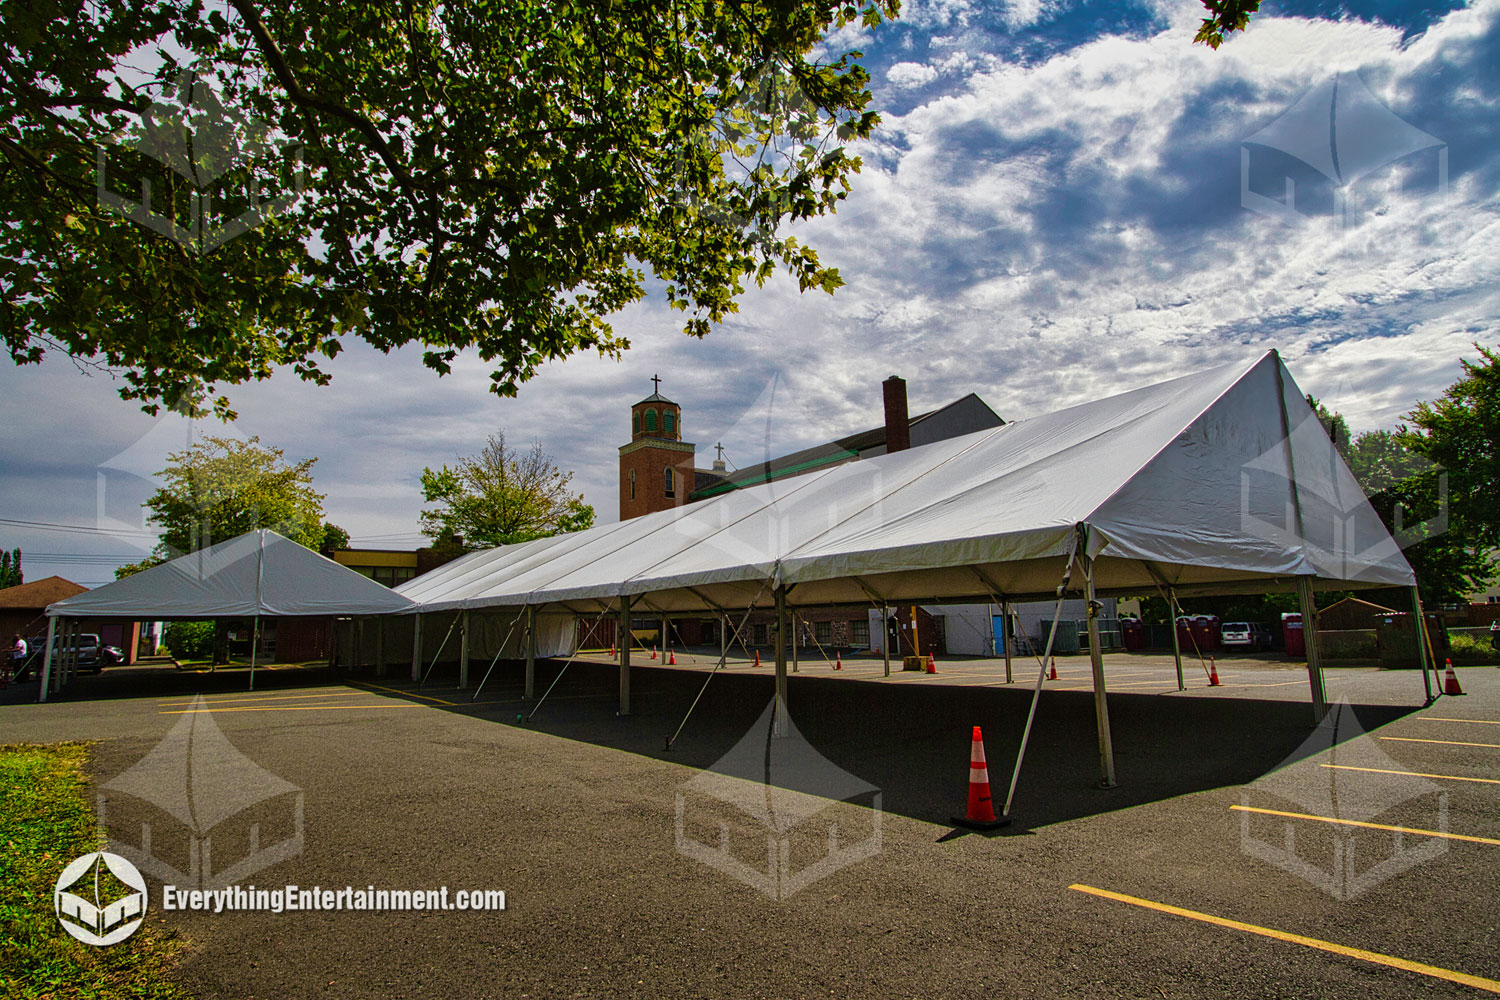 40x120 Frame Tent setup in a parking lot